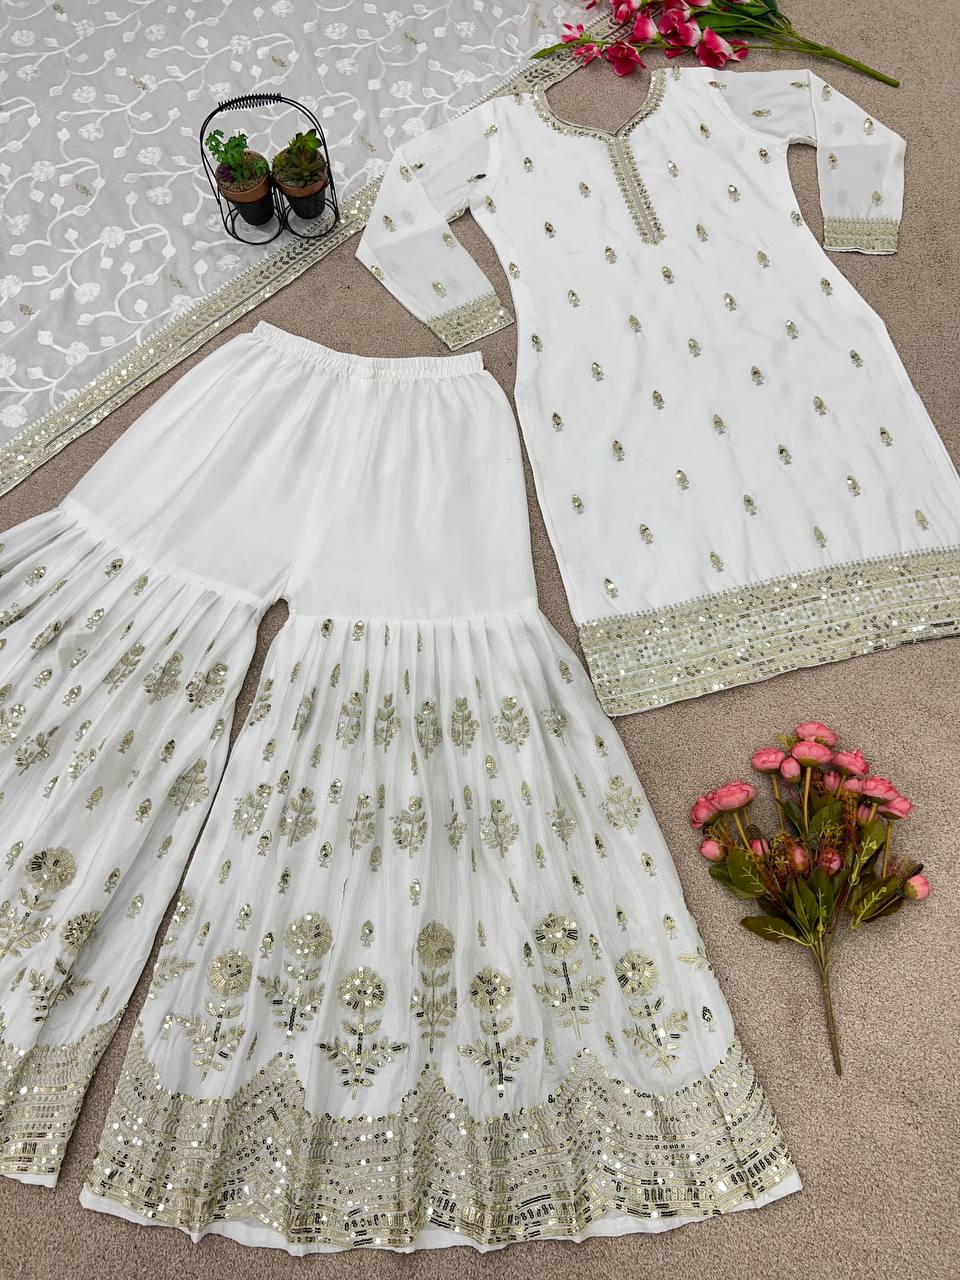 "Embrace elegance with our exquisite Chinnon silk top, plazo, and dupatta set - where tradition meets opulence in every thread."